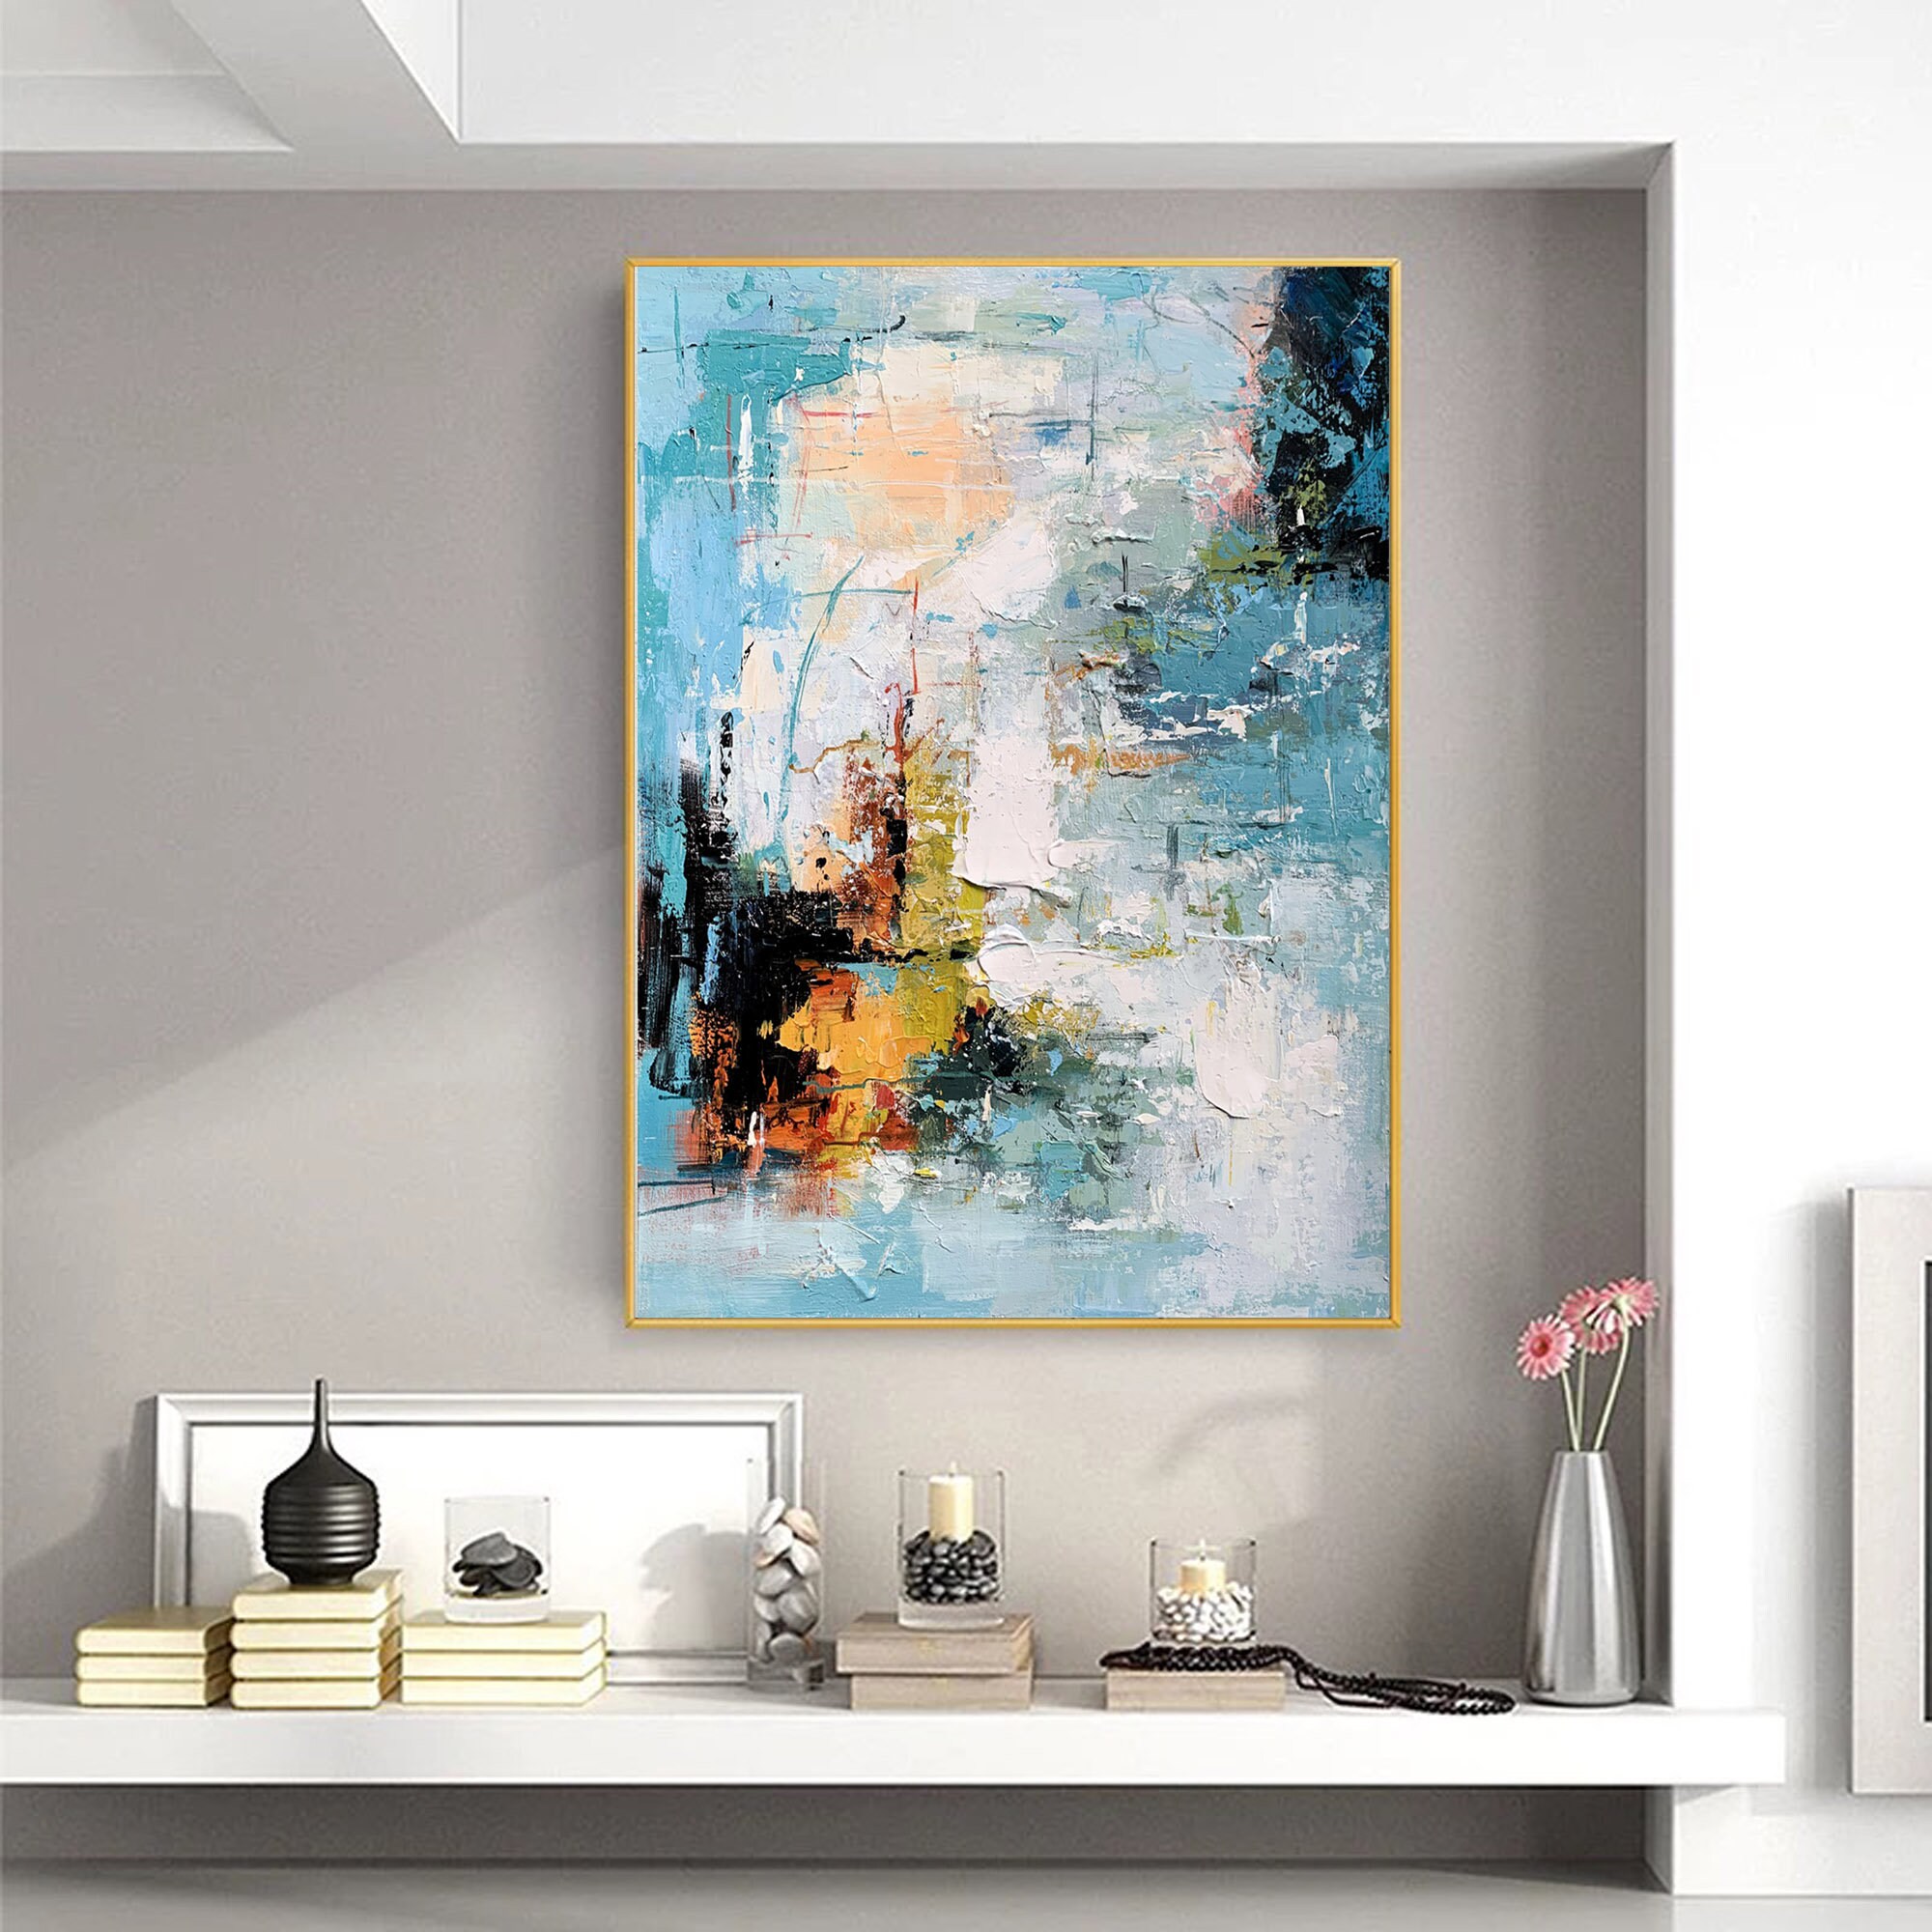  100% Hand-Painted Original Oil Painting Contemporary Art Large  Canvas Art Abstract Modern Living Room Wall Art Decor Modern Acrylic  Abstract Art Brother Gifts 96X48 Unframed: Paintings